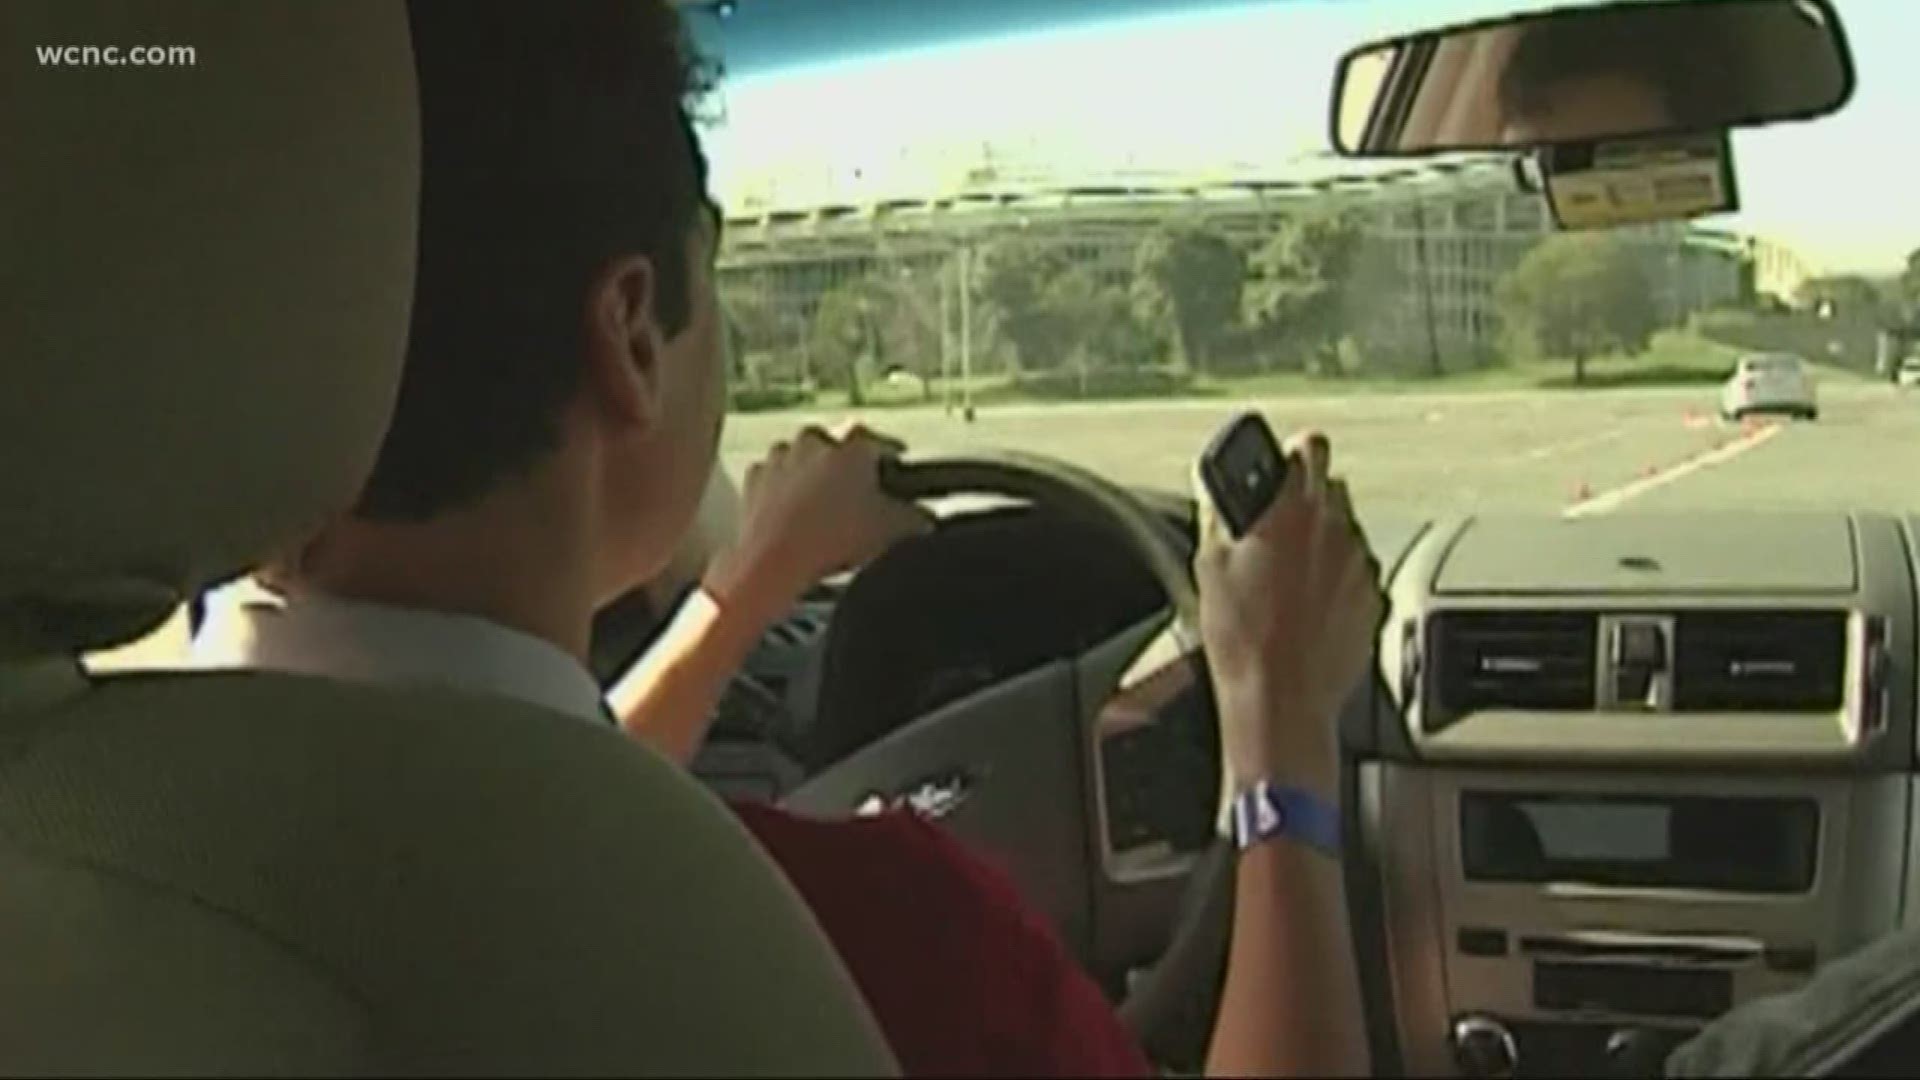 A bill that would've made South Carolina hands-free seems to have hit a road block. Currently, texting while driving is illegal, but it's not illegal to hold your phone.